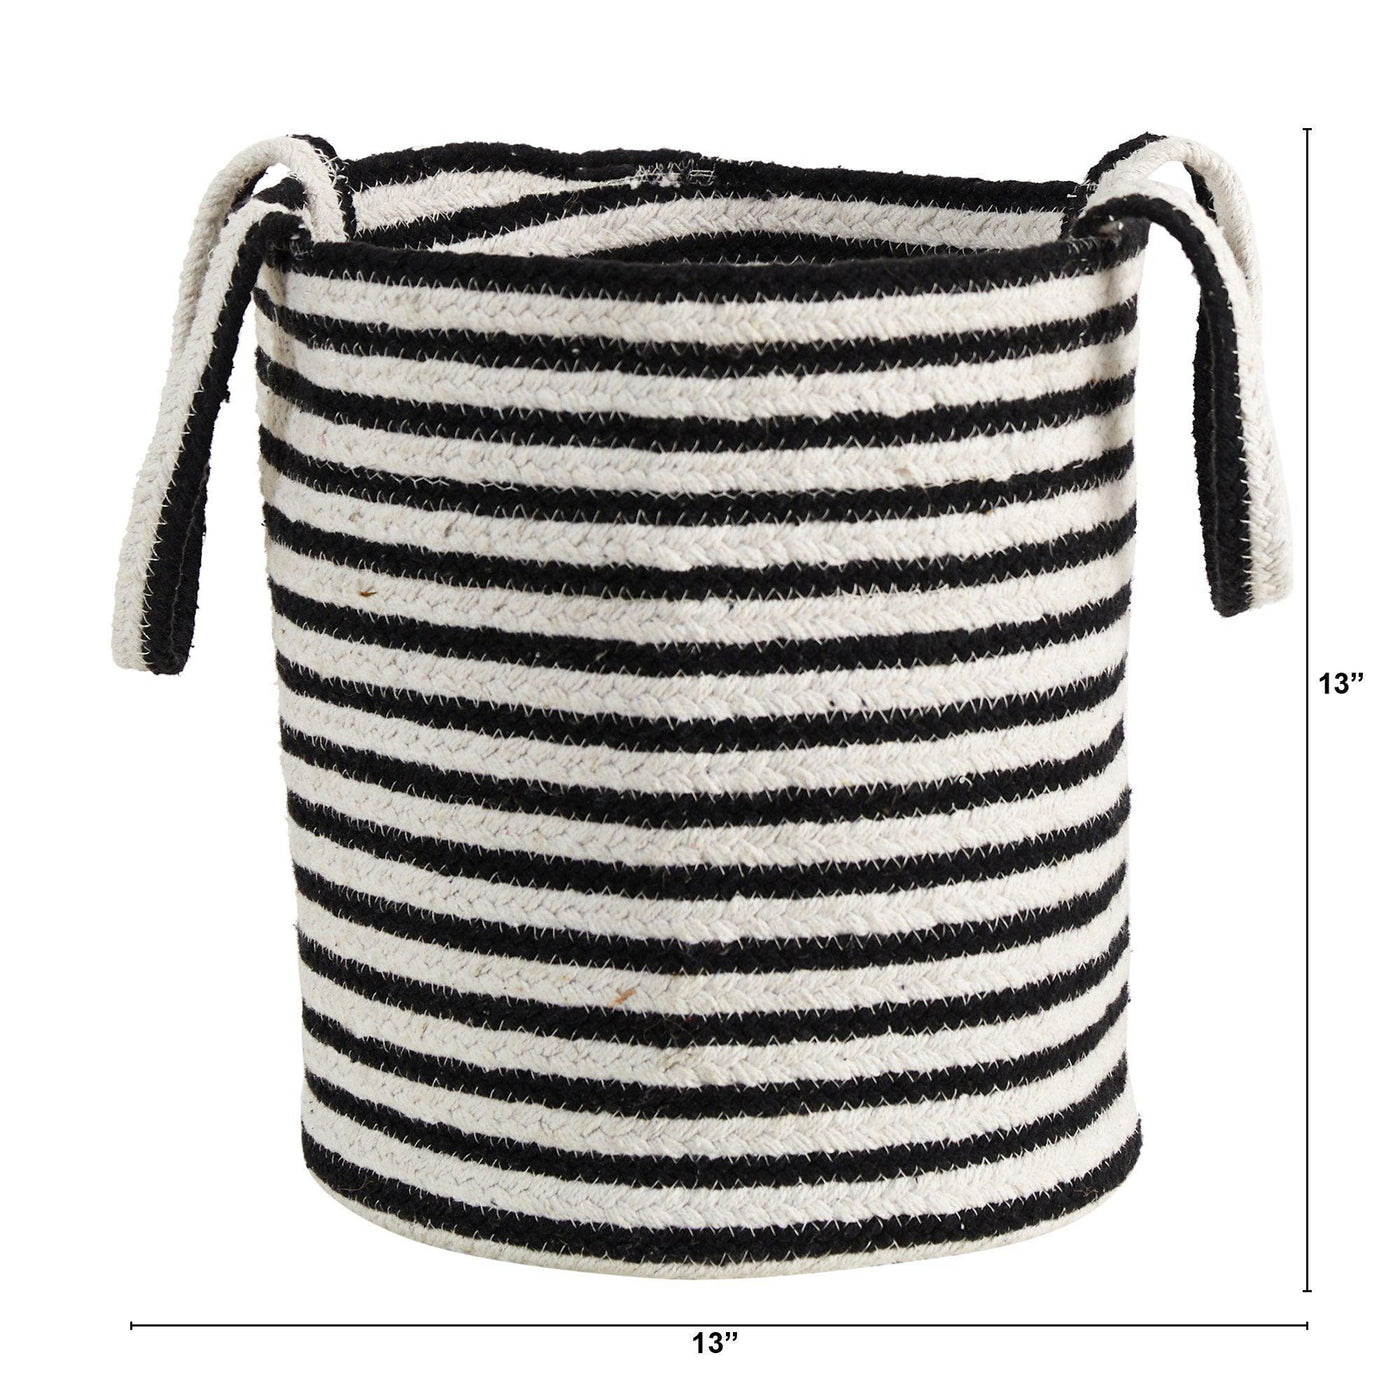 13” Boho Chic Basket Natural Cotton, Handwoven Black and White Stripe with Handles by Nearly Natural - Vysn